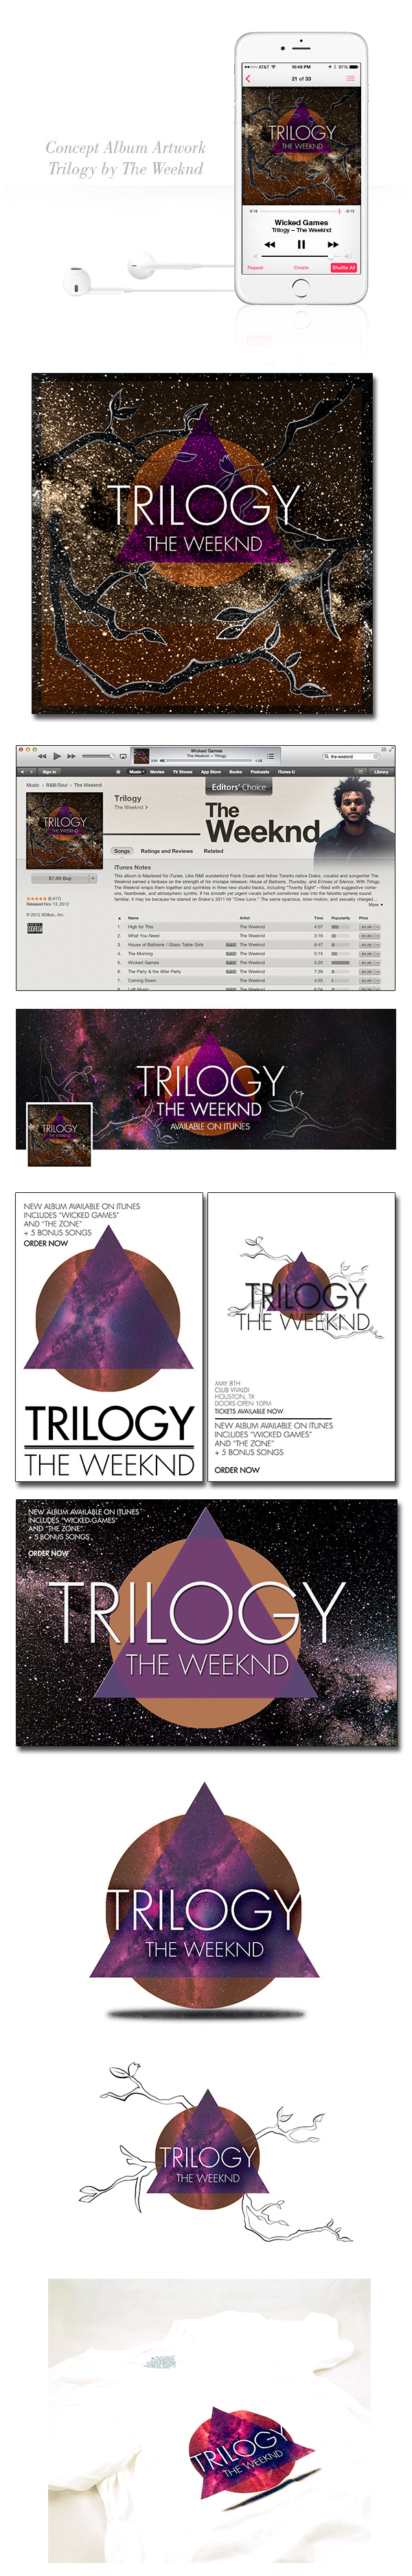 Album Art Trilogy by The Weeknd